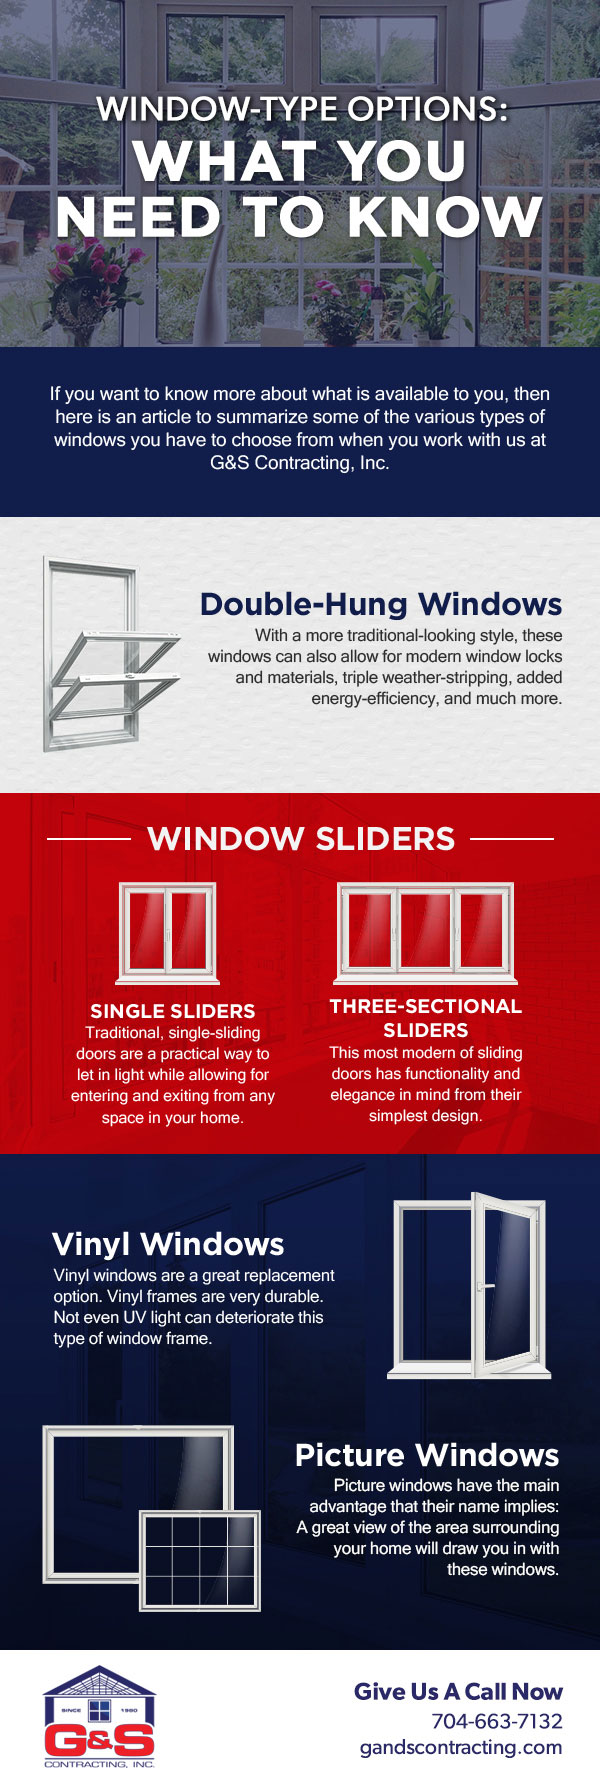 Choosing Your Windows: What You May Not Know About Some Window-Type Options